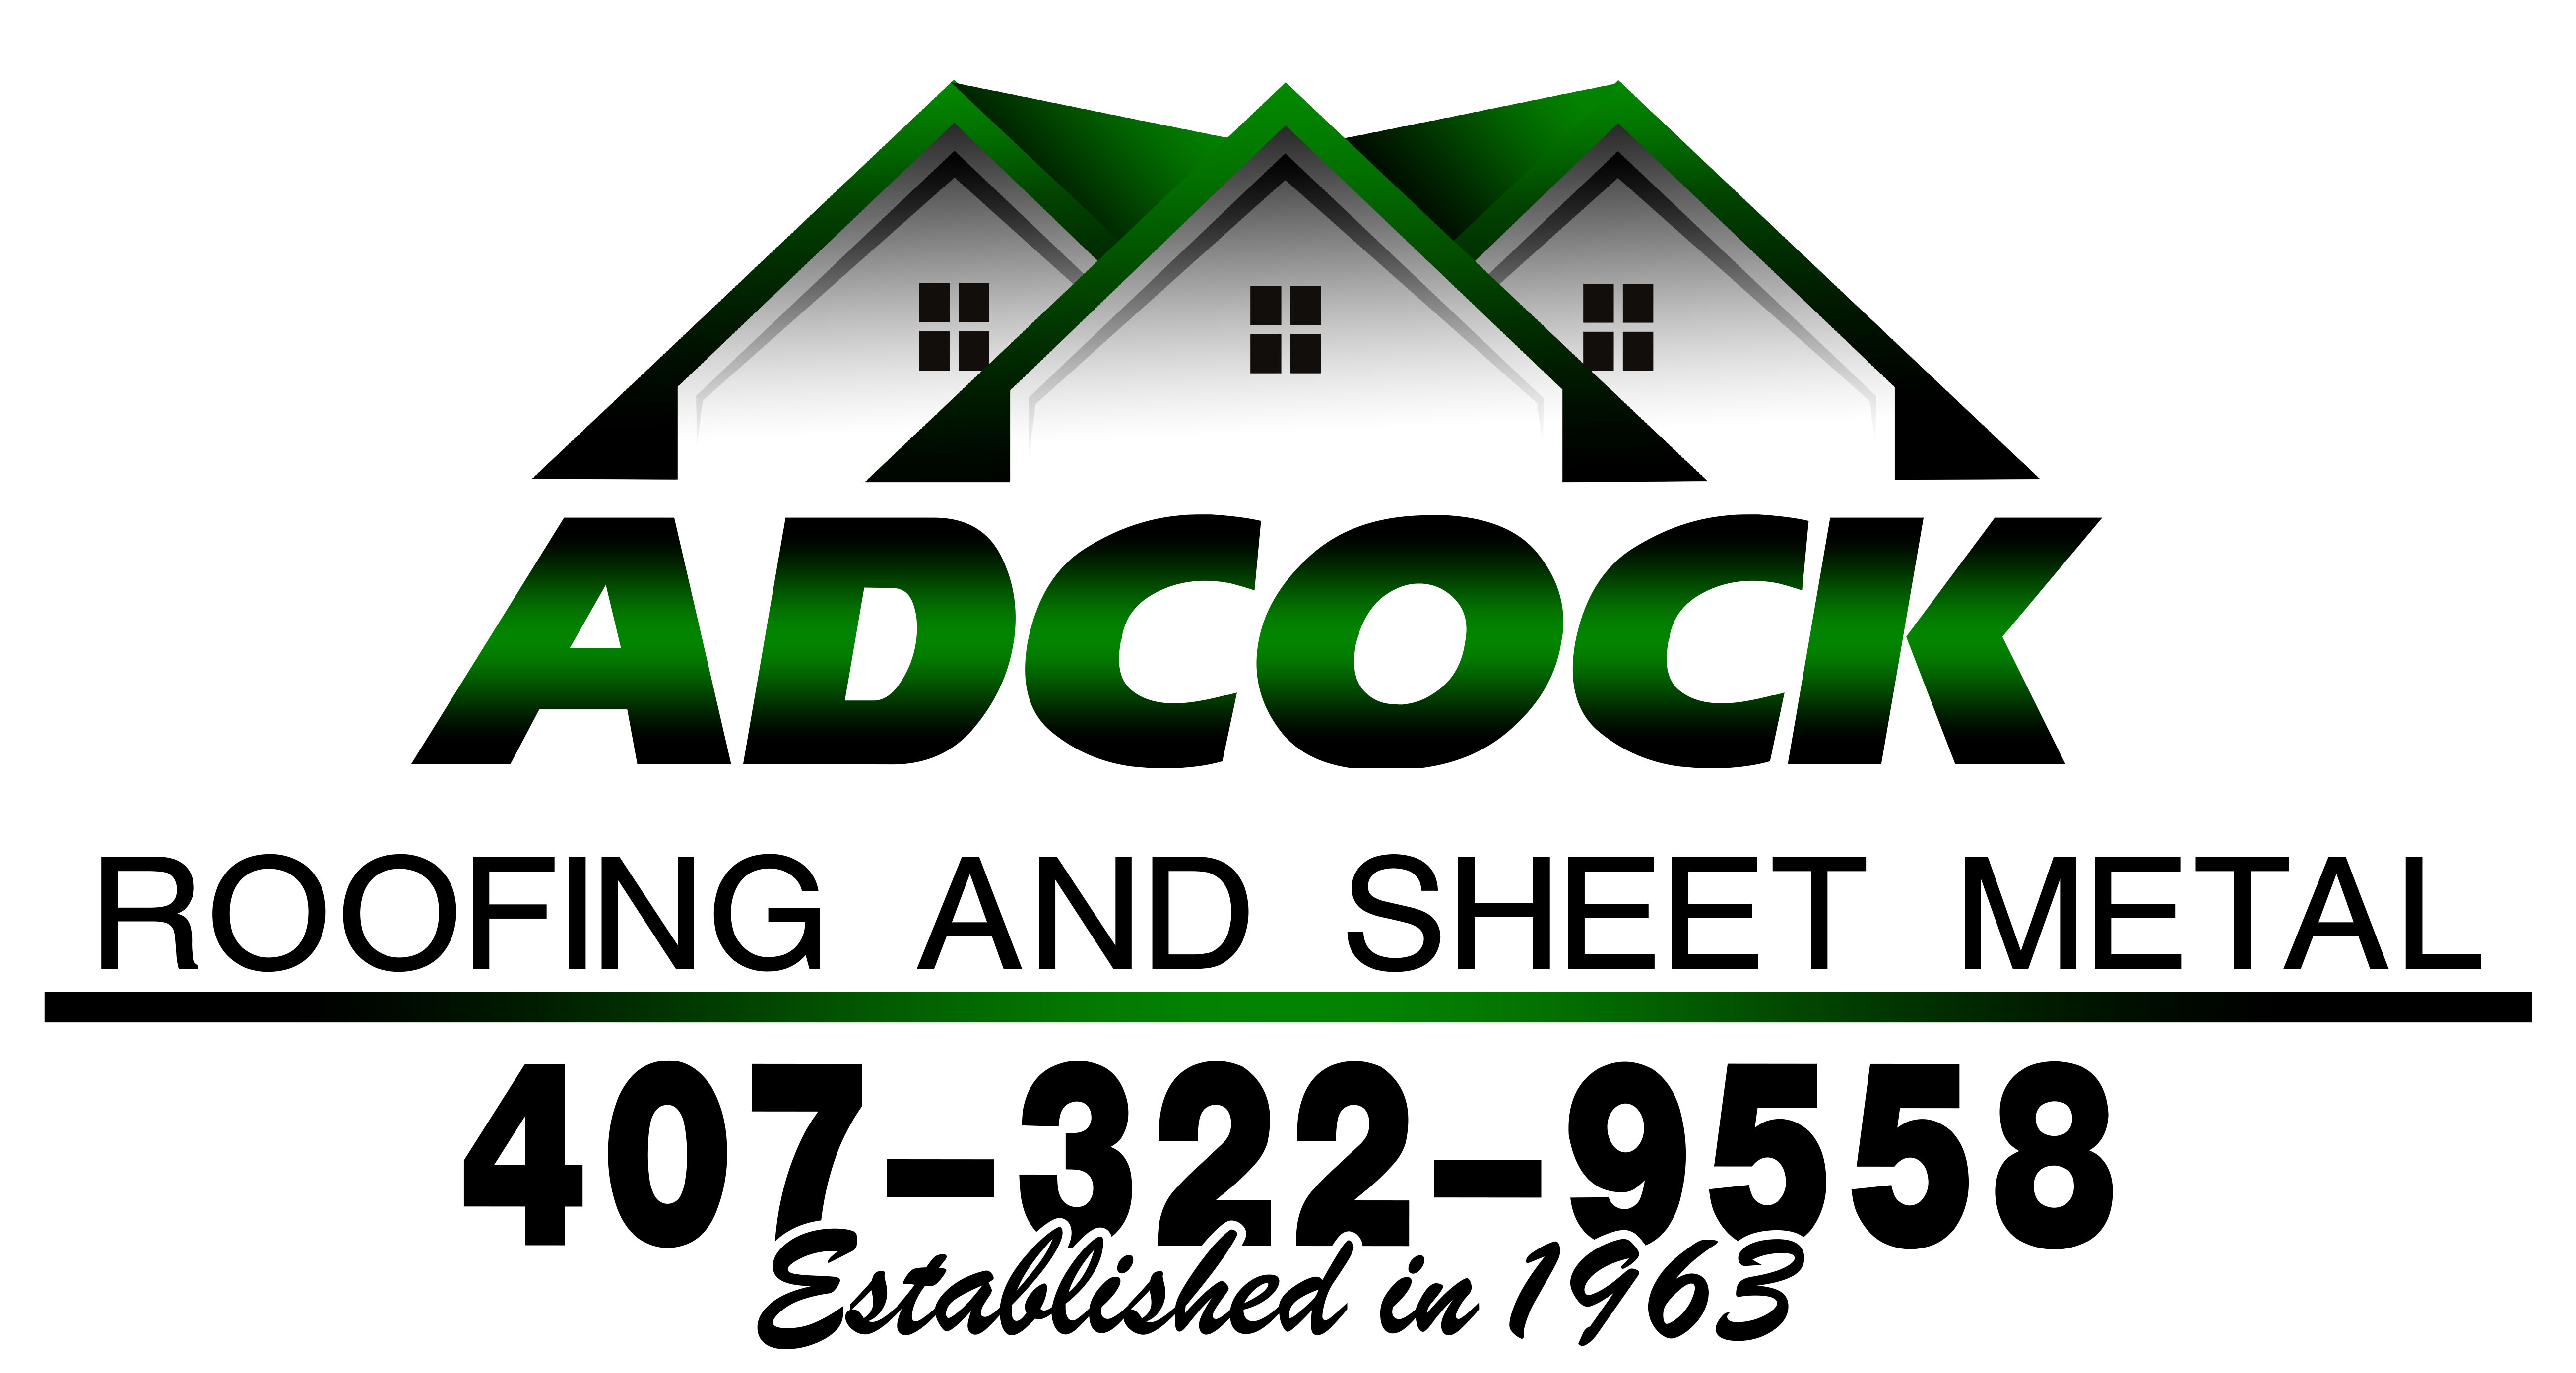 Free Estimate Adcock Roofing